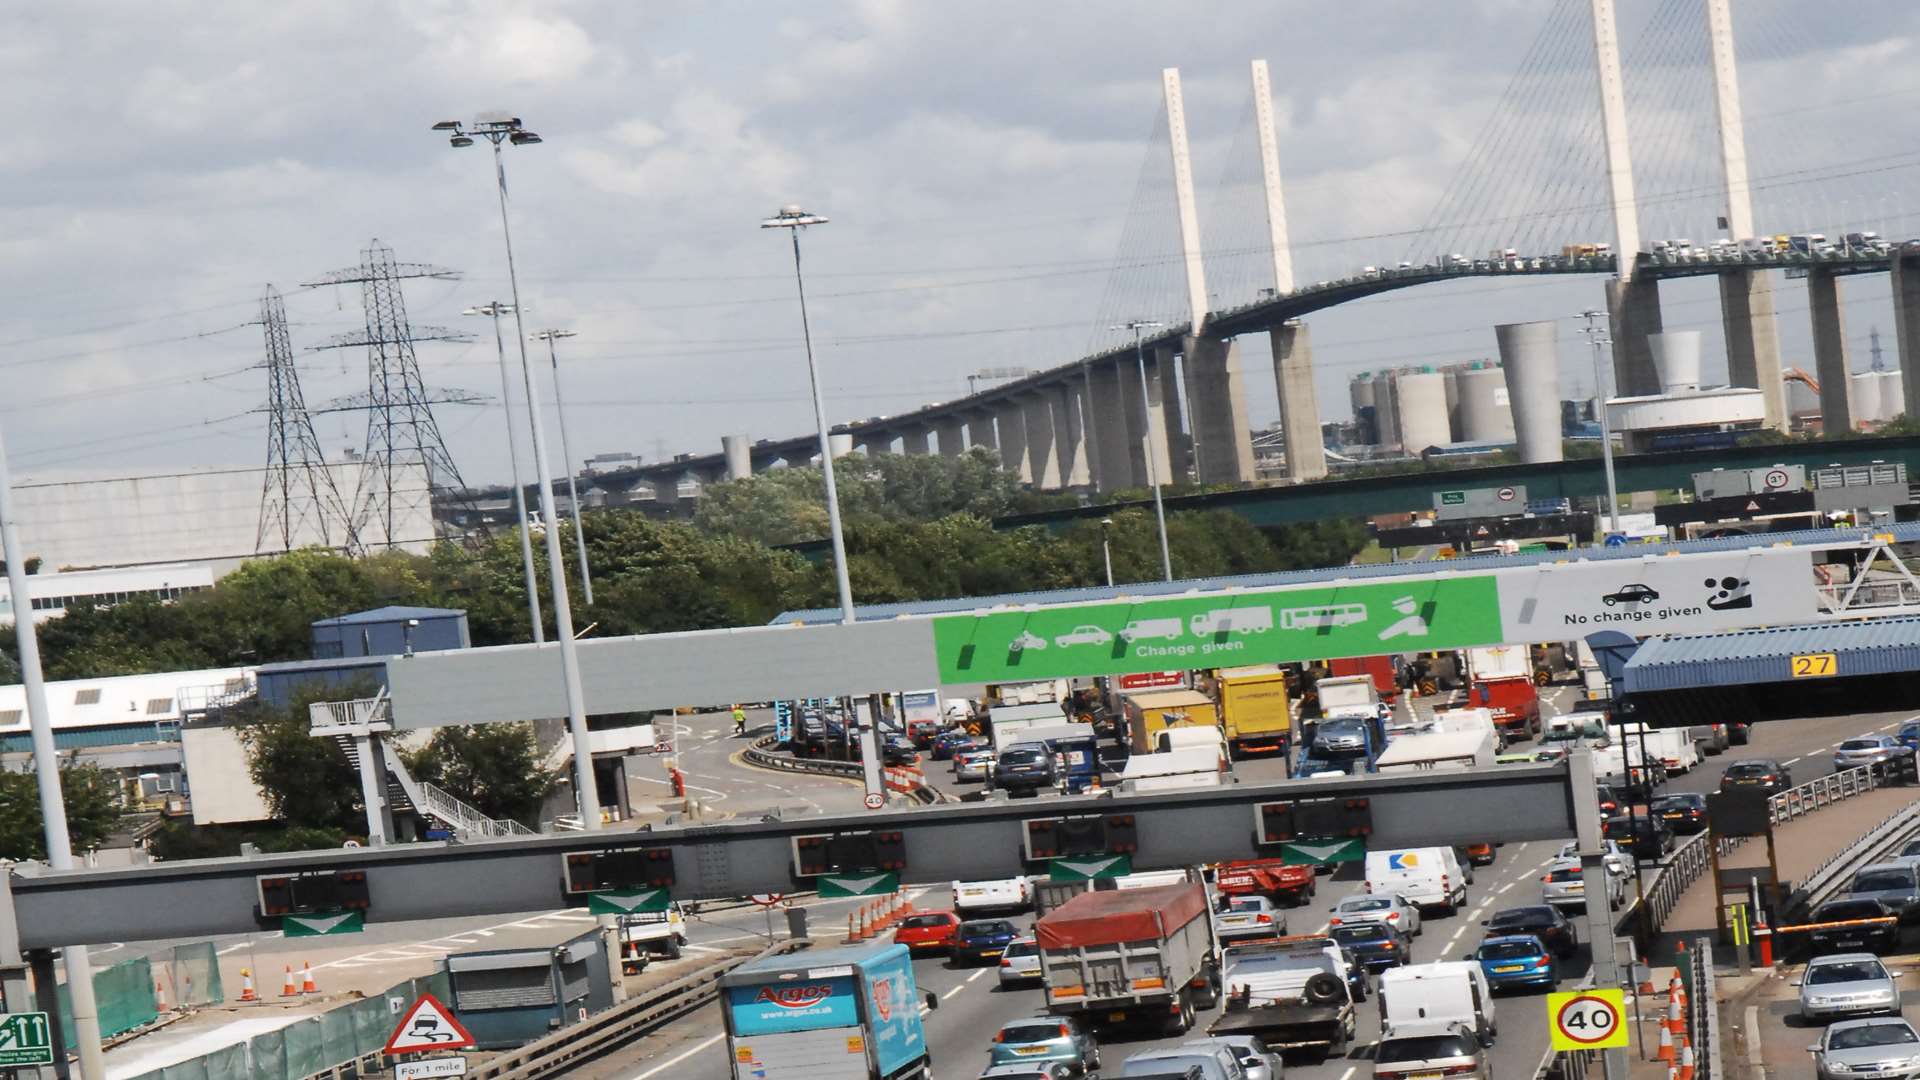 There are long queues at the Dartford Crossing. Library picture: Nick Johnson